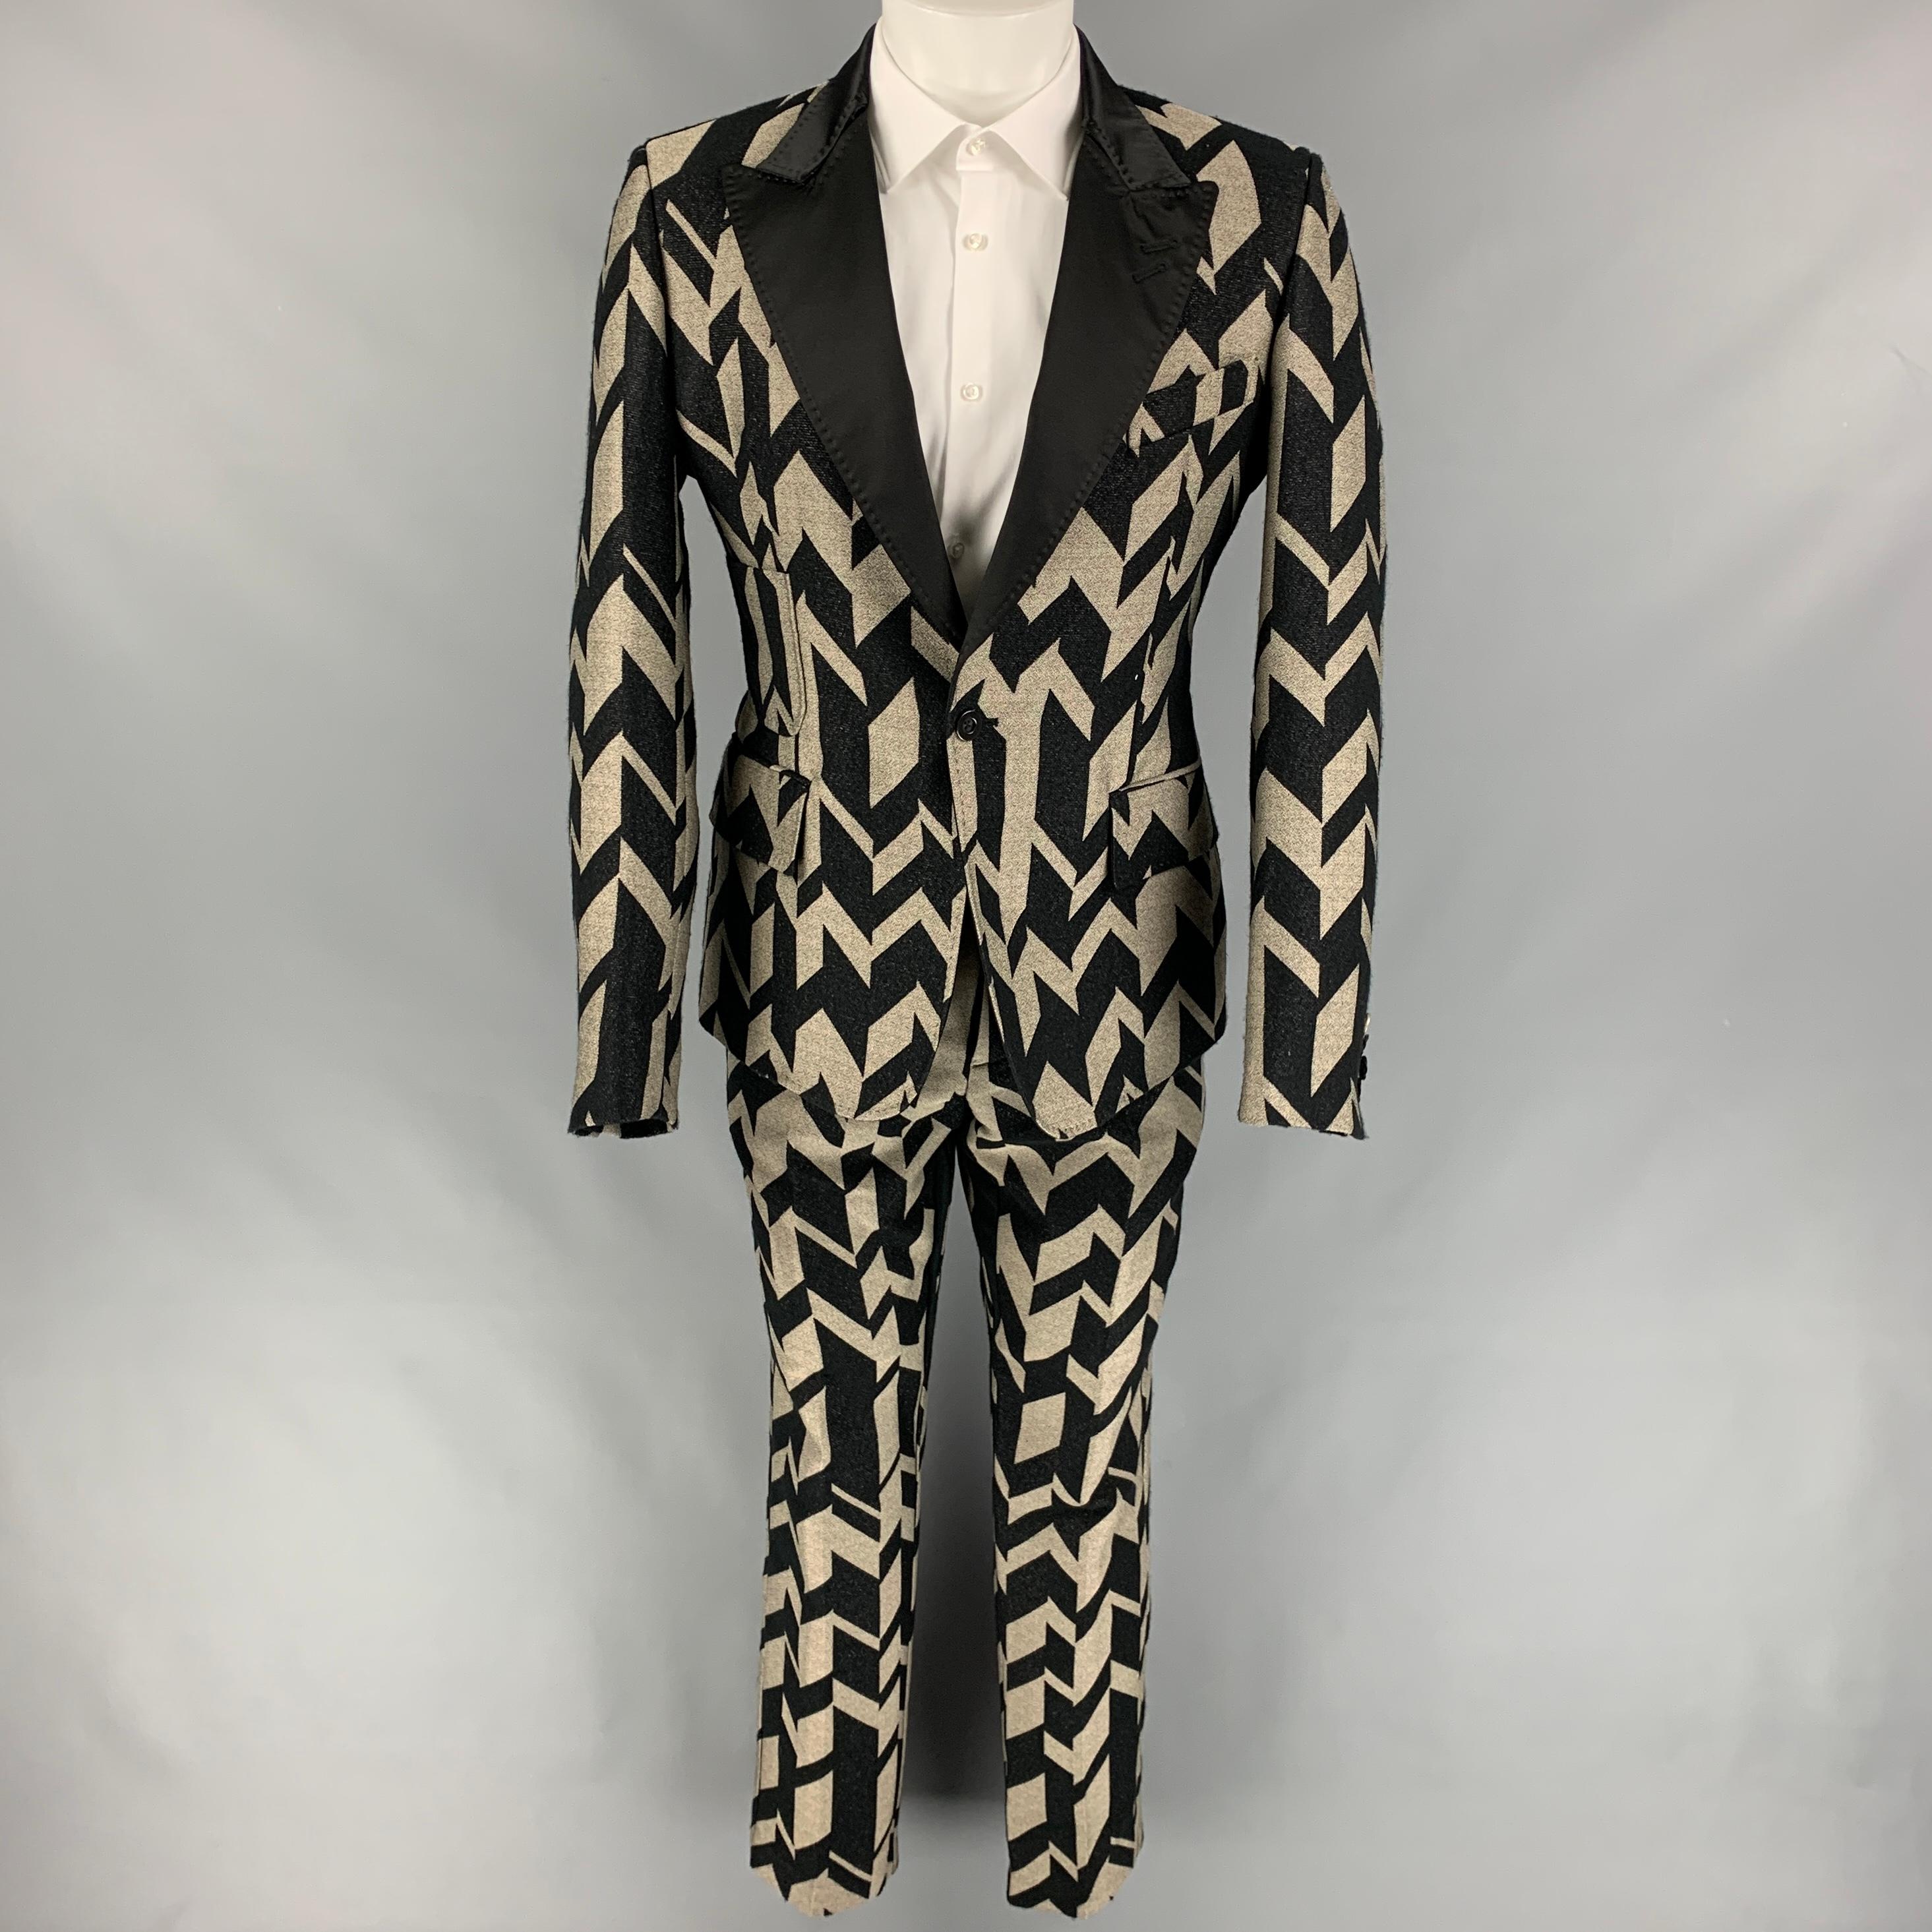 TOM REBL suit comes in a black & gold chevron print polyester blend with a full liner and includes a single breasted, single button sport coat with peak lapel and matching flat front trousers. Made in Italy.

Very Good Pre-Owned Condition. Pants